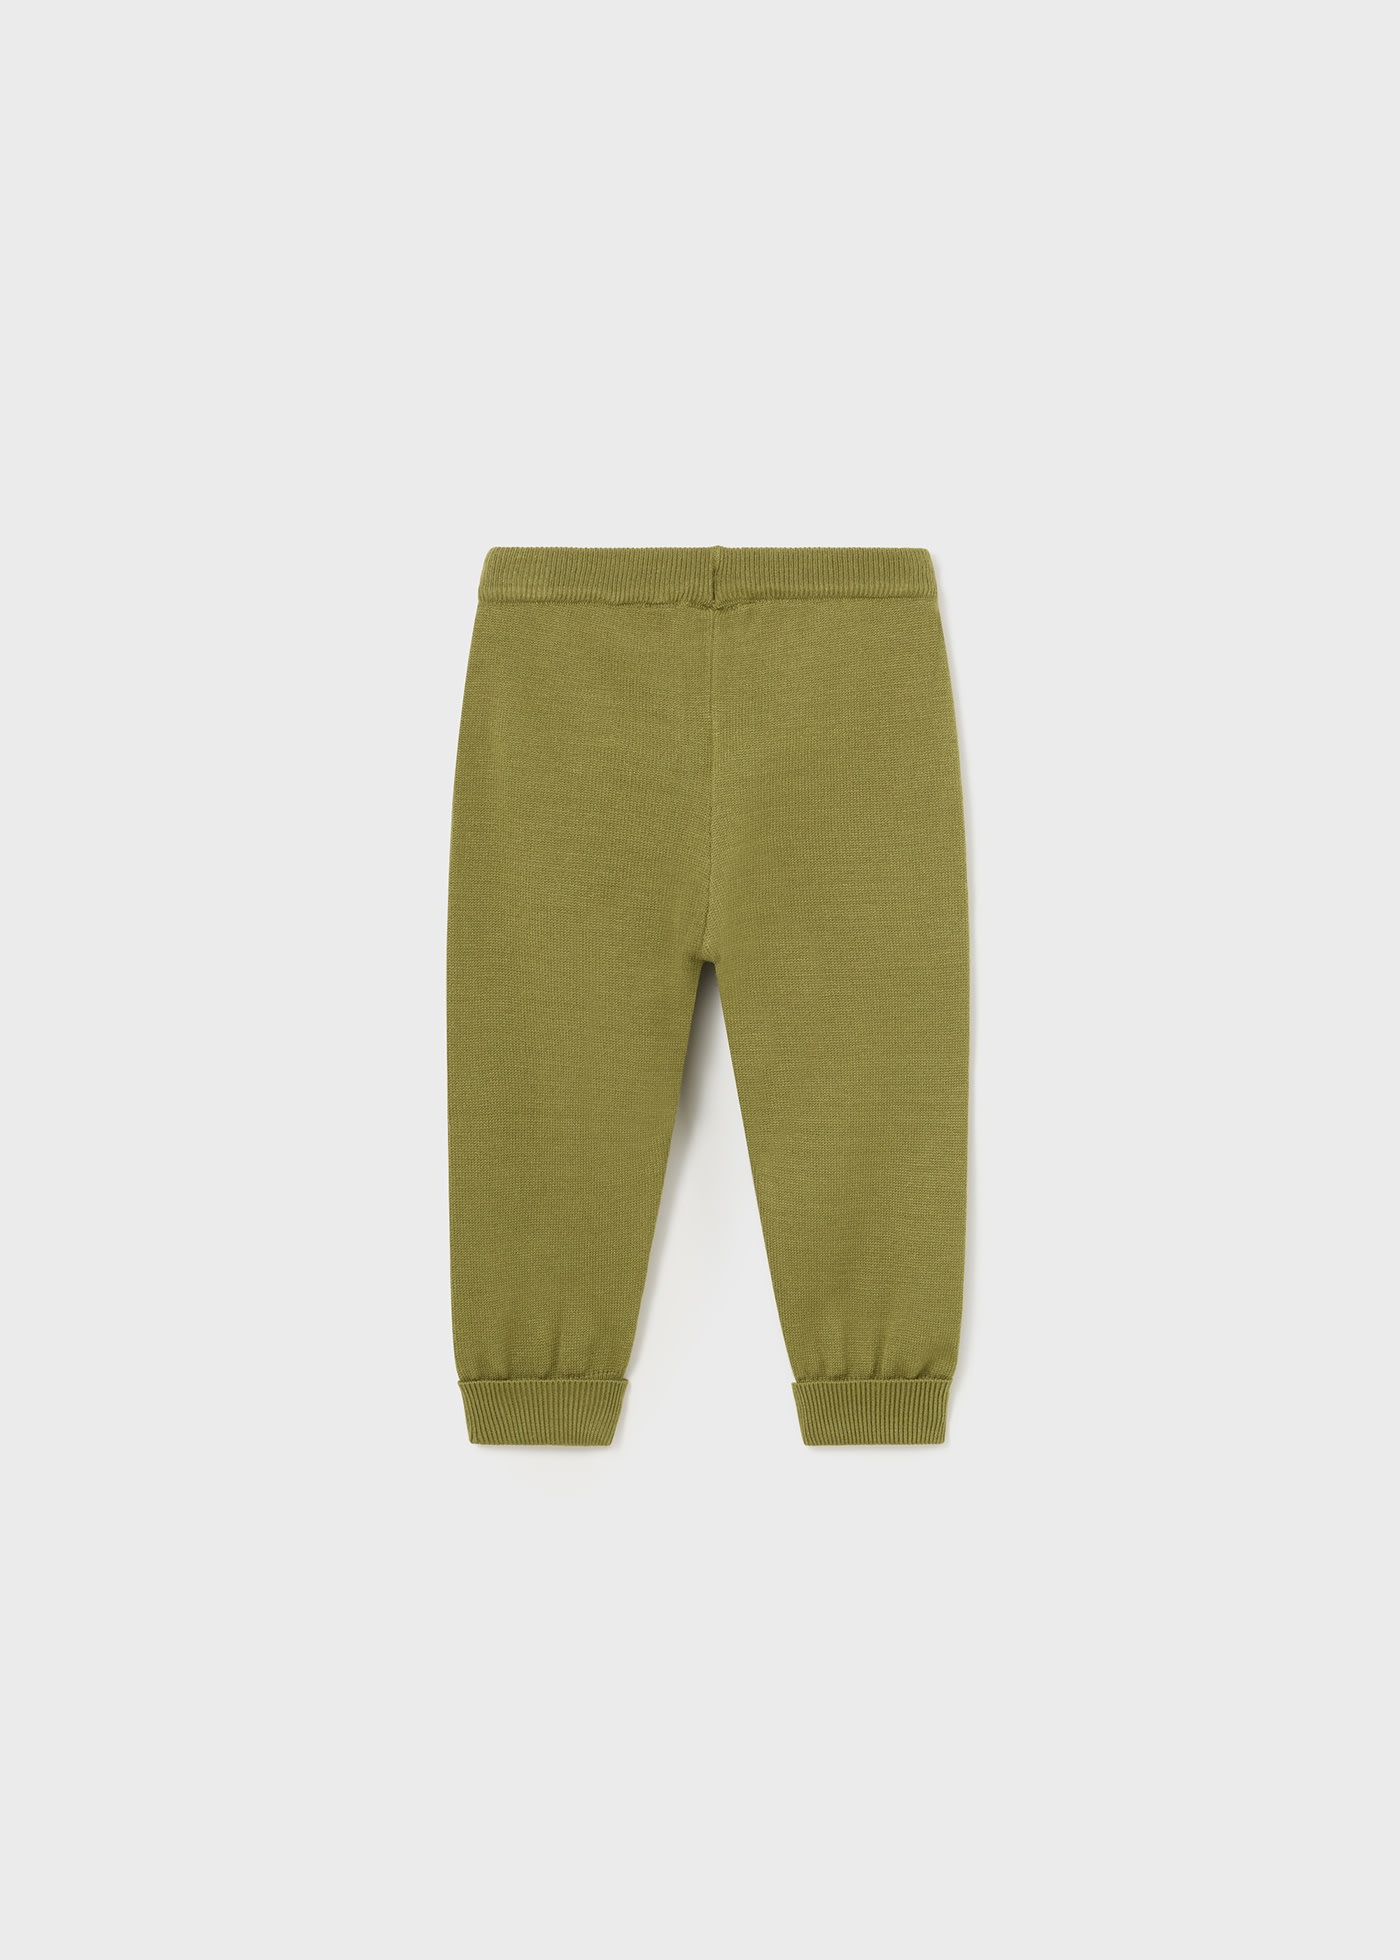 https://assets.mayoral.com/images/t_auto_img,f_auto,c_limit,w_1920/v1690800014/13-02543-094-XL-5/baby-tricot-joggers-bay-leaf-XL-5.jpg